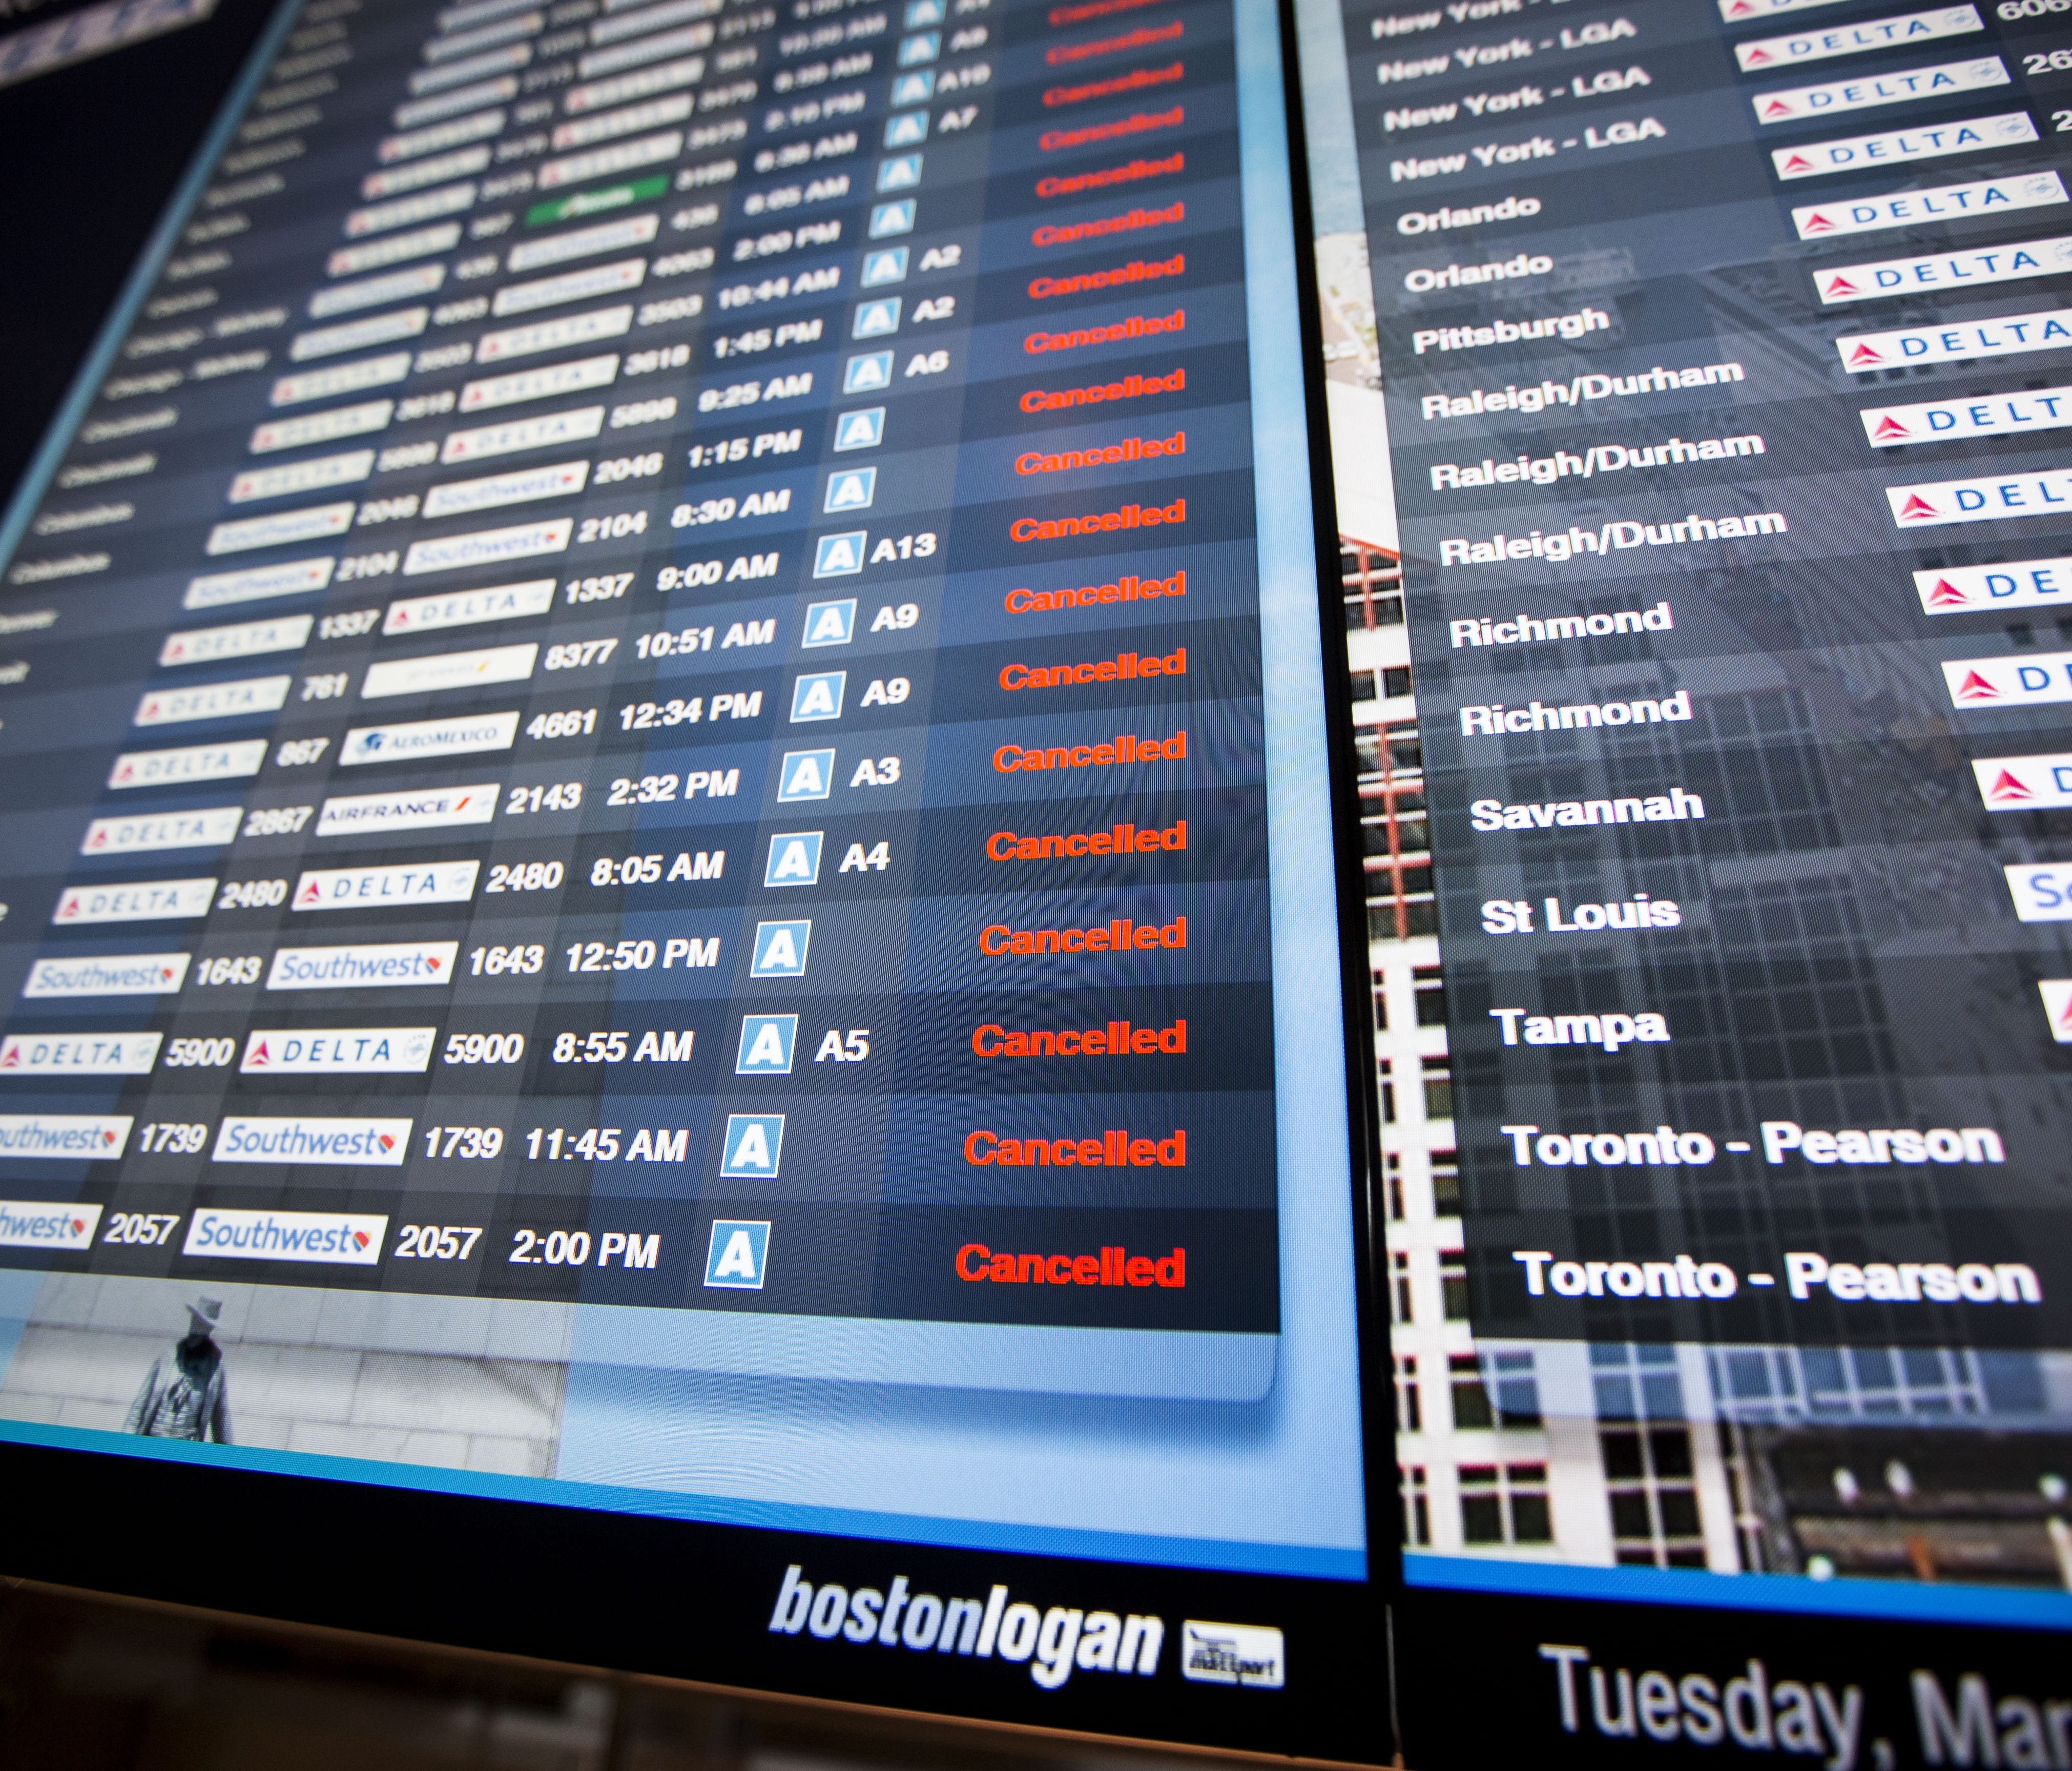 This file photo from March 13, 2018, shows a long list of cancellations on a flight information board at Boston Logan International Airport.